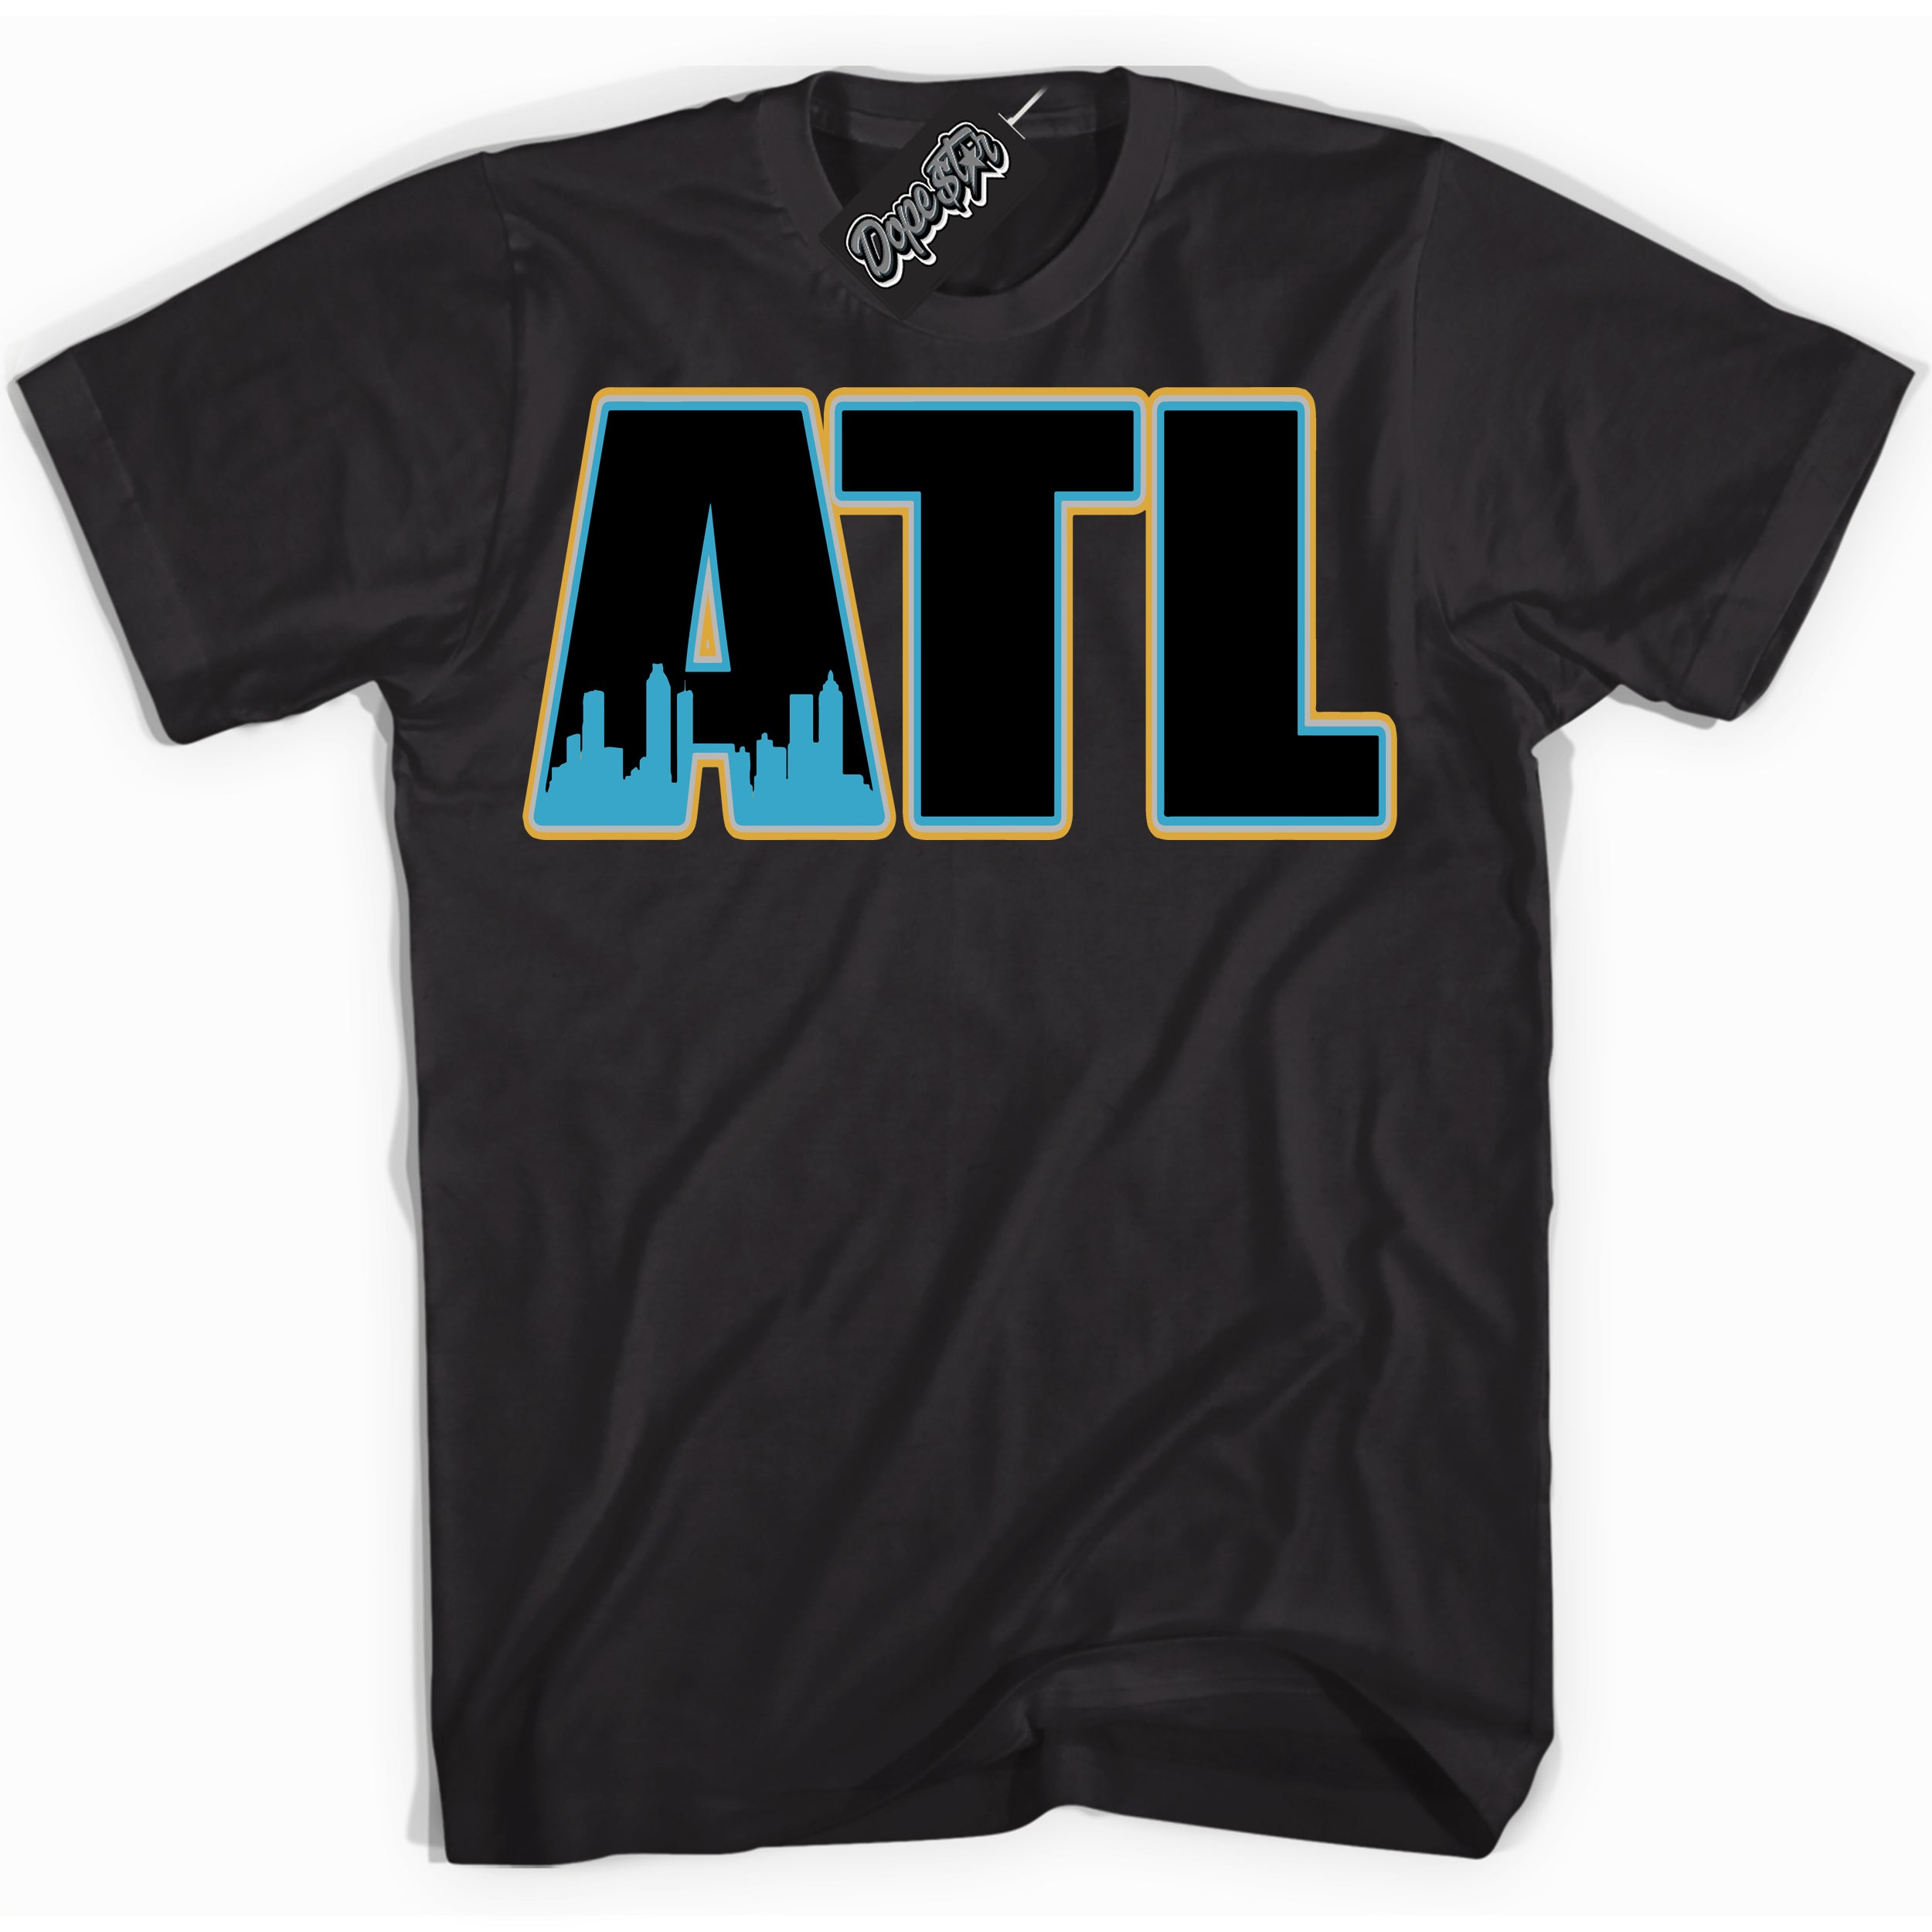 Cool Black Shirt with “ Atlanta” design that perfectly matches Aqua 5s Sneakers.